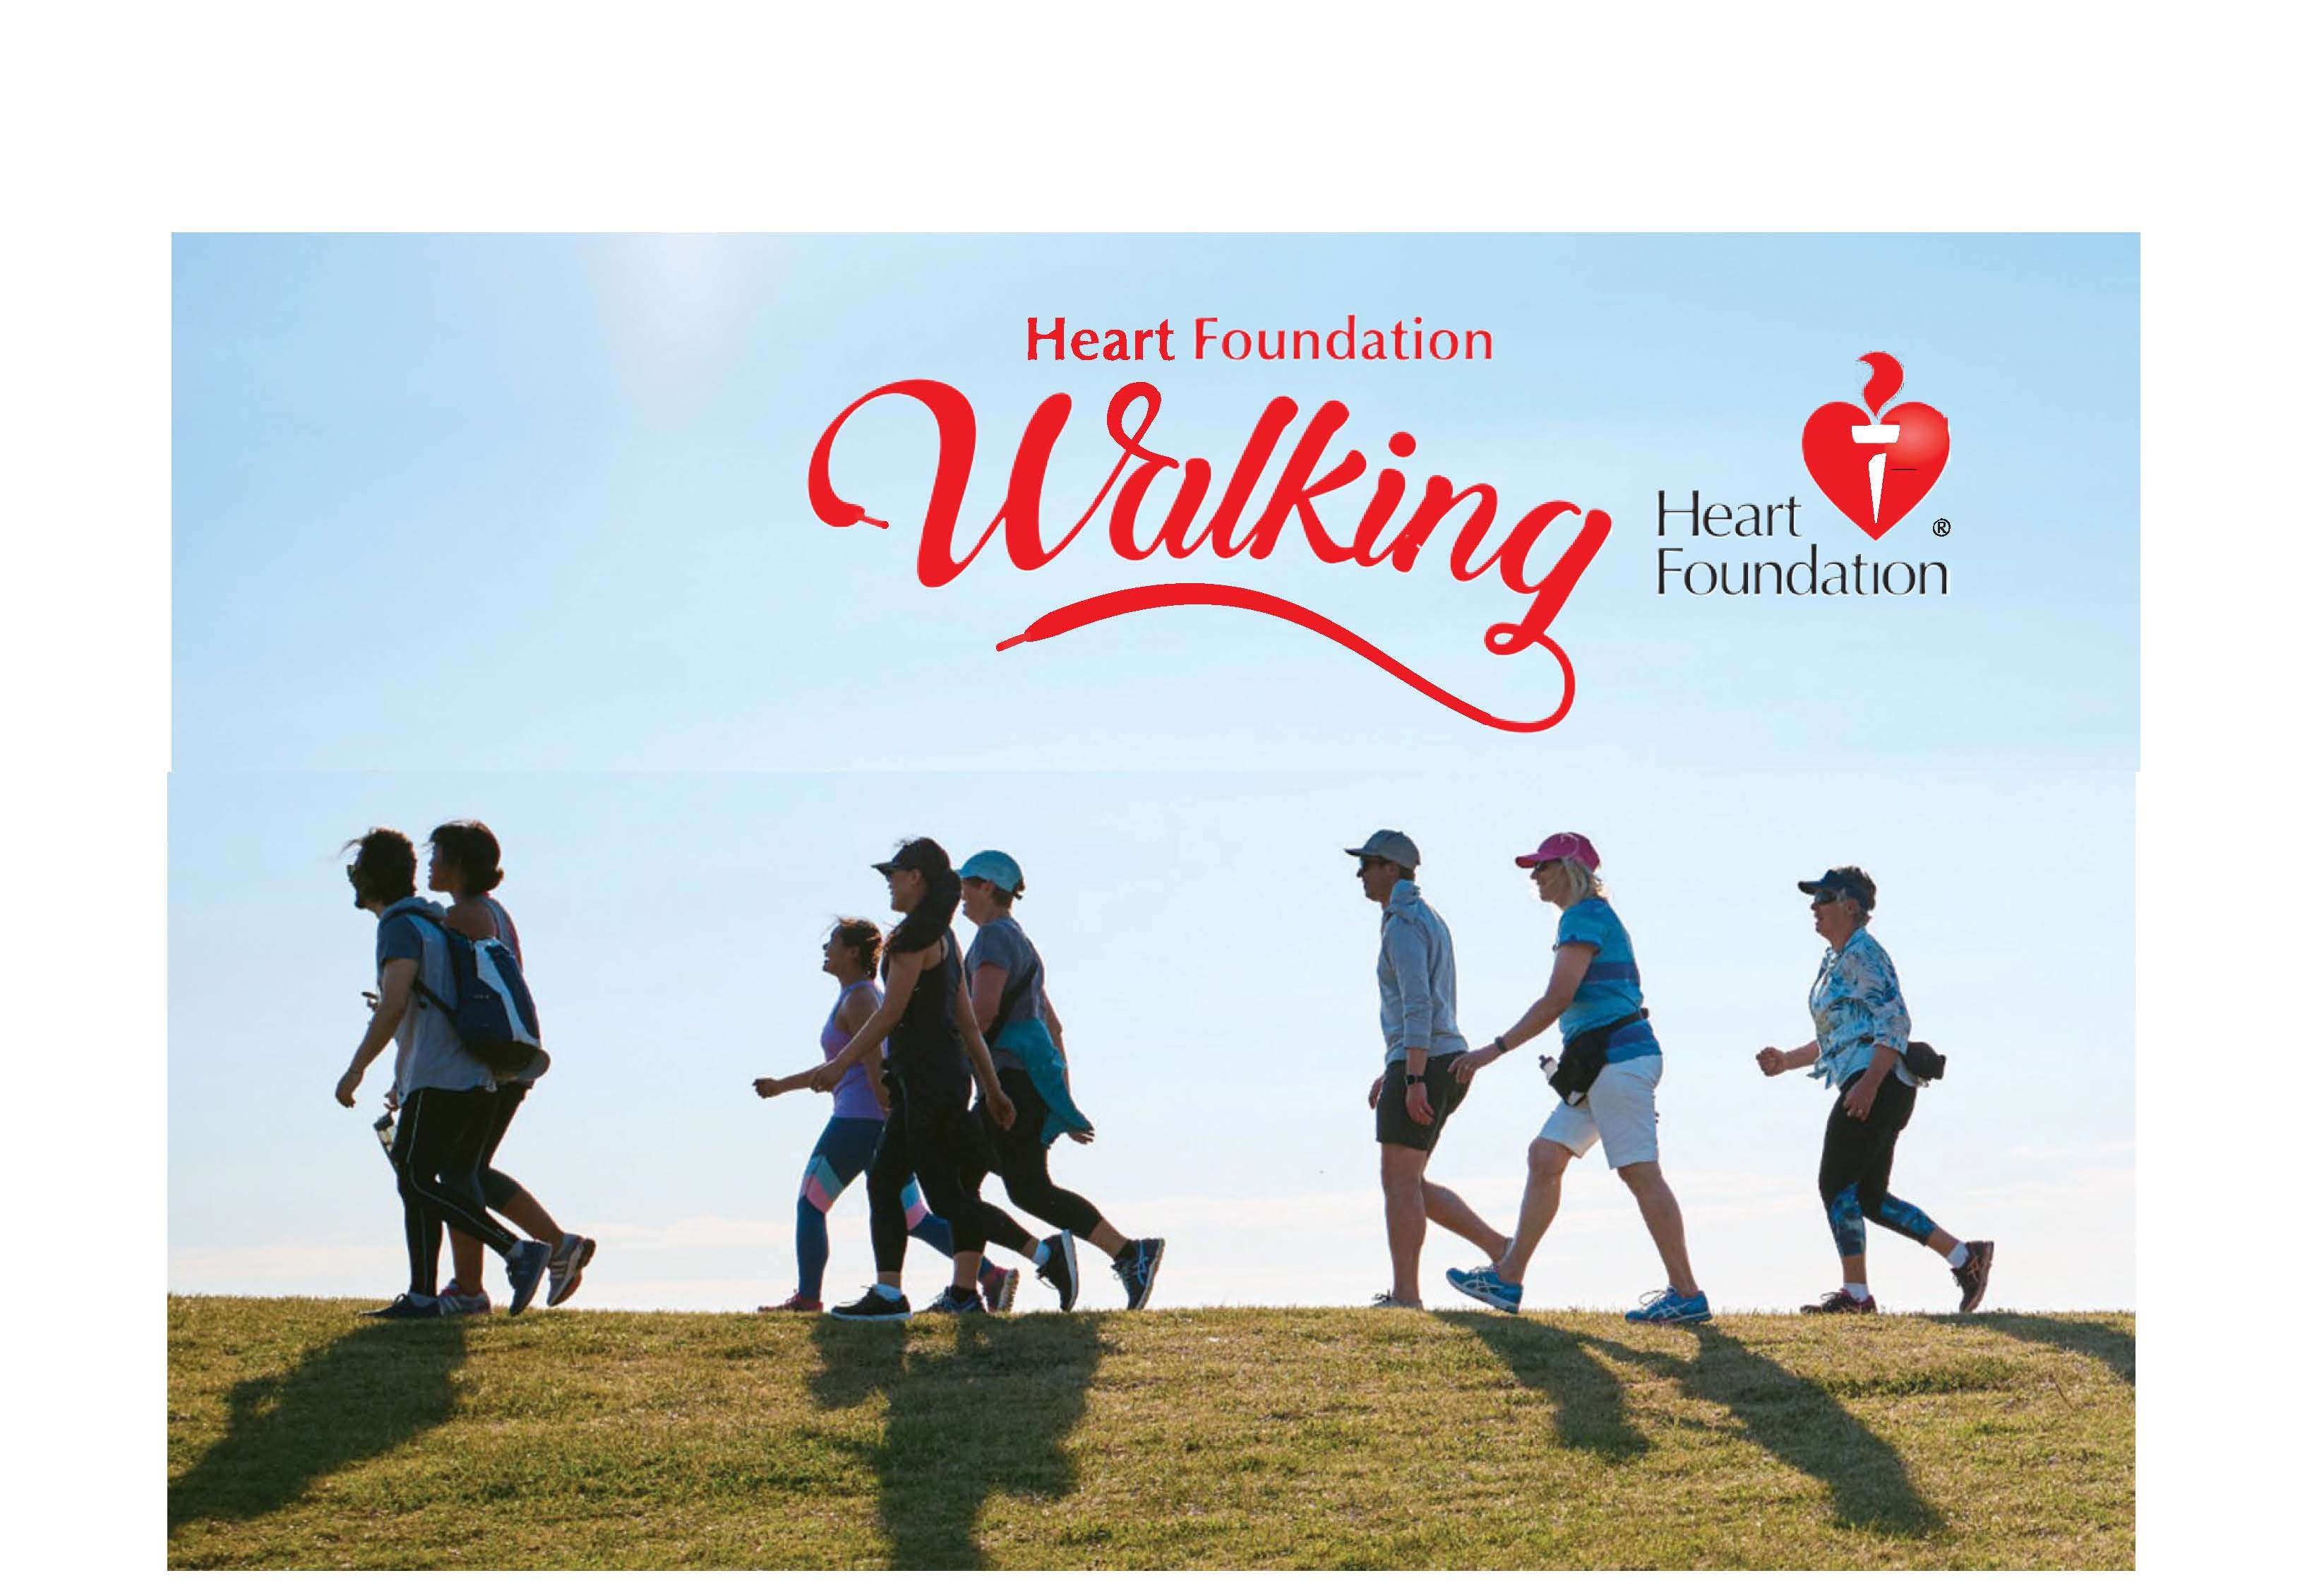 poster advertising walking group, showing people walking on a clear day, and Heart Foundation logo